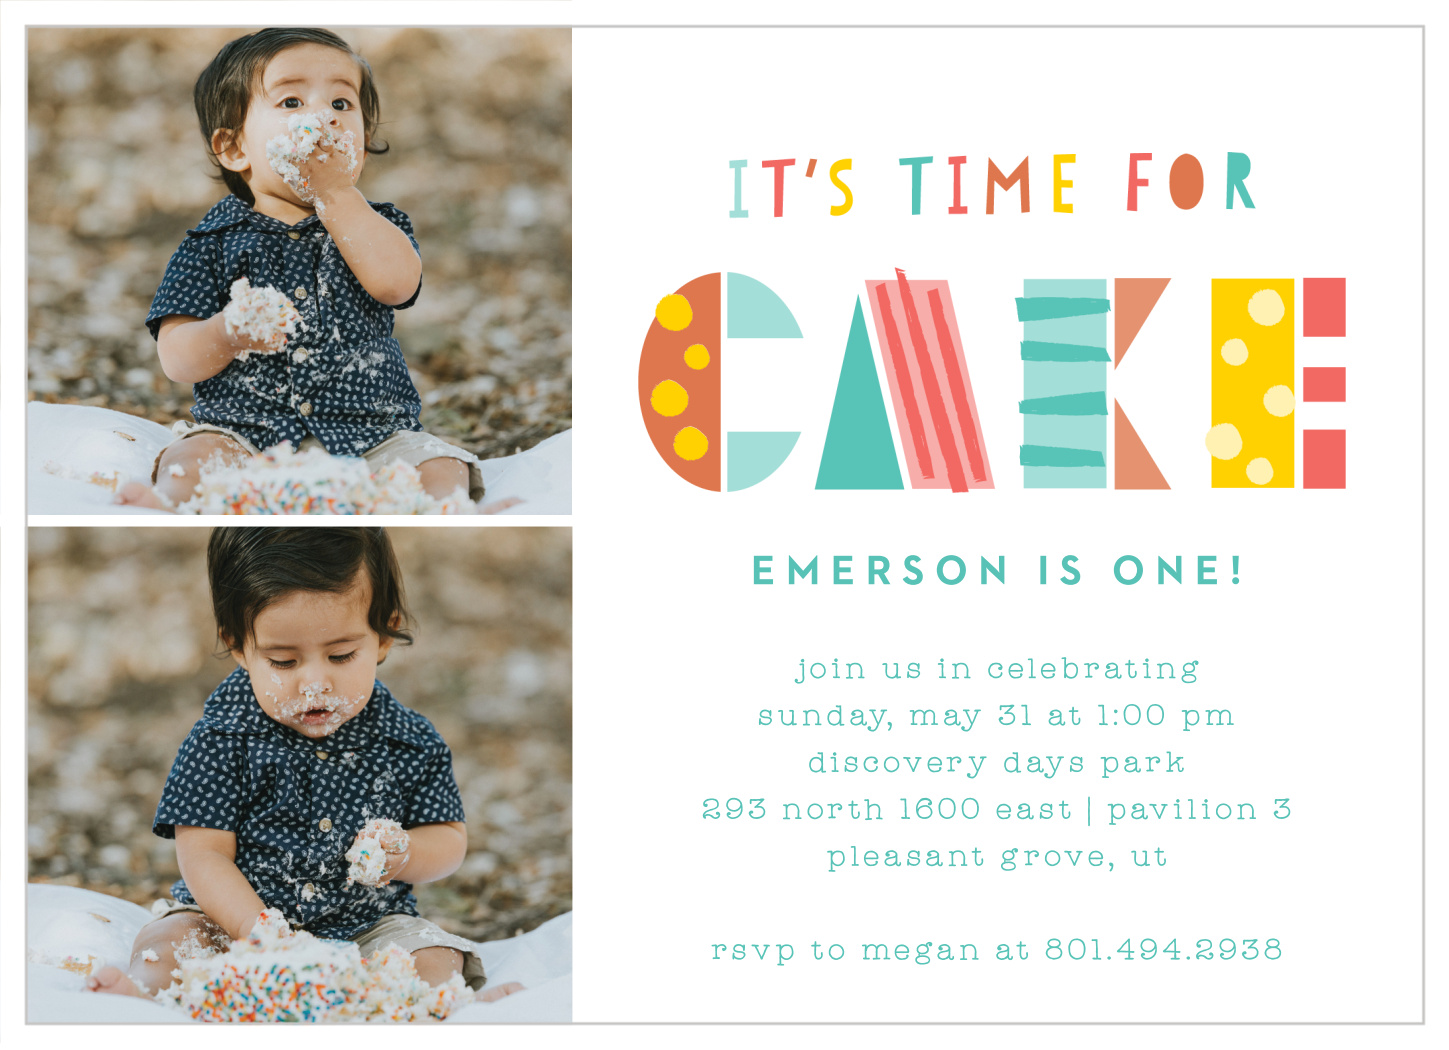 Printable Postcard Invitations: Make Your Own Postcard Party Invitations